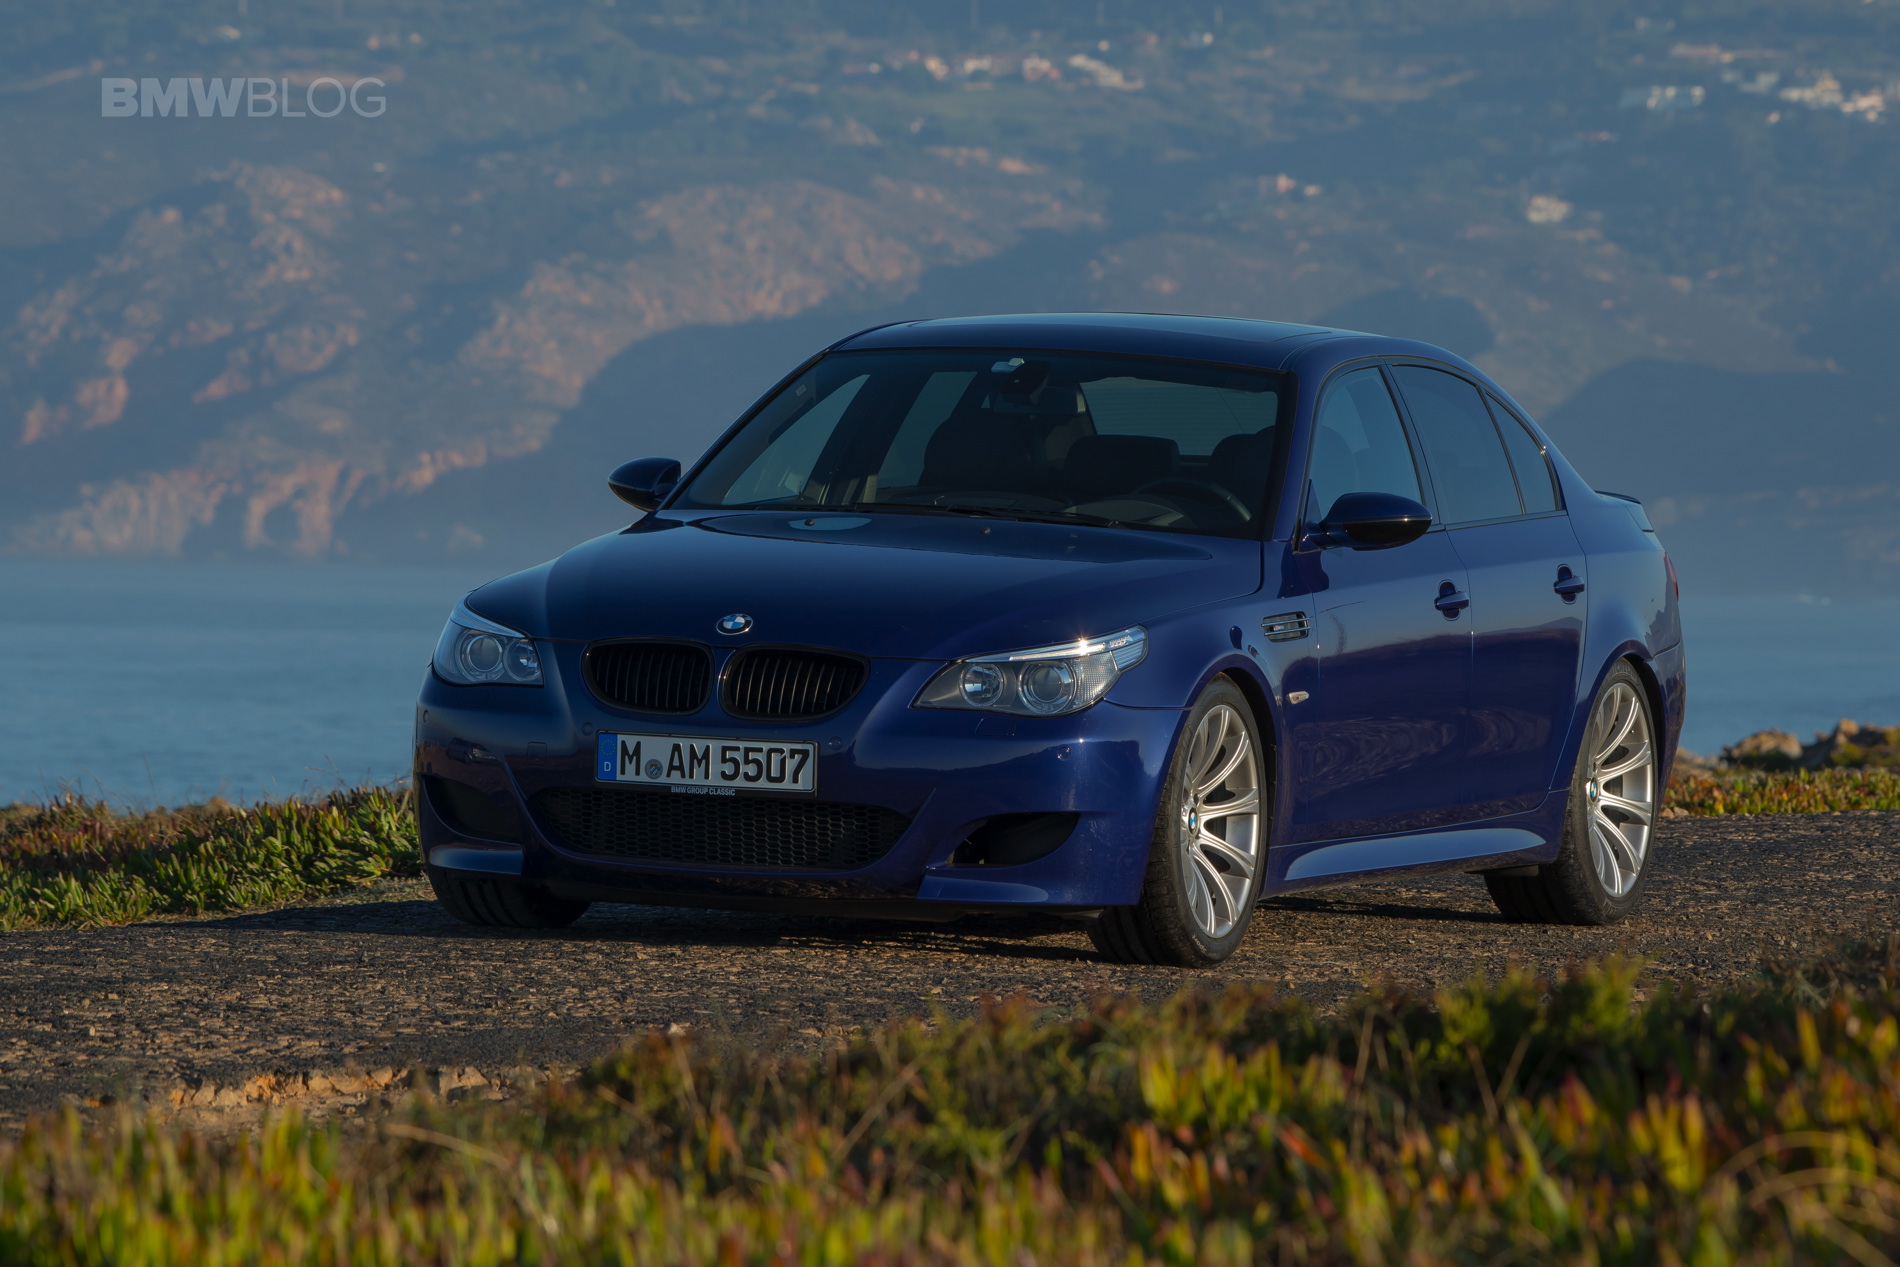 BMW E60 M5 review - see why it has the best M engine ever!